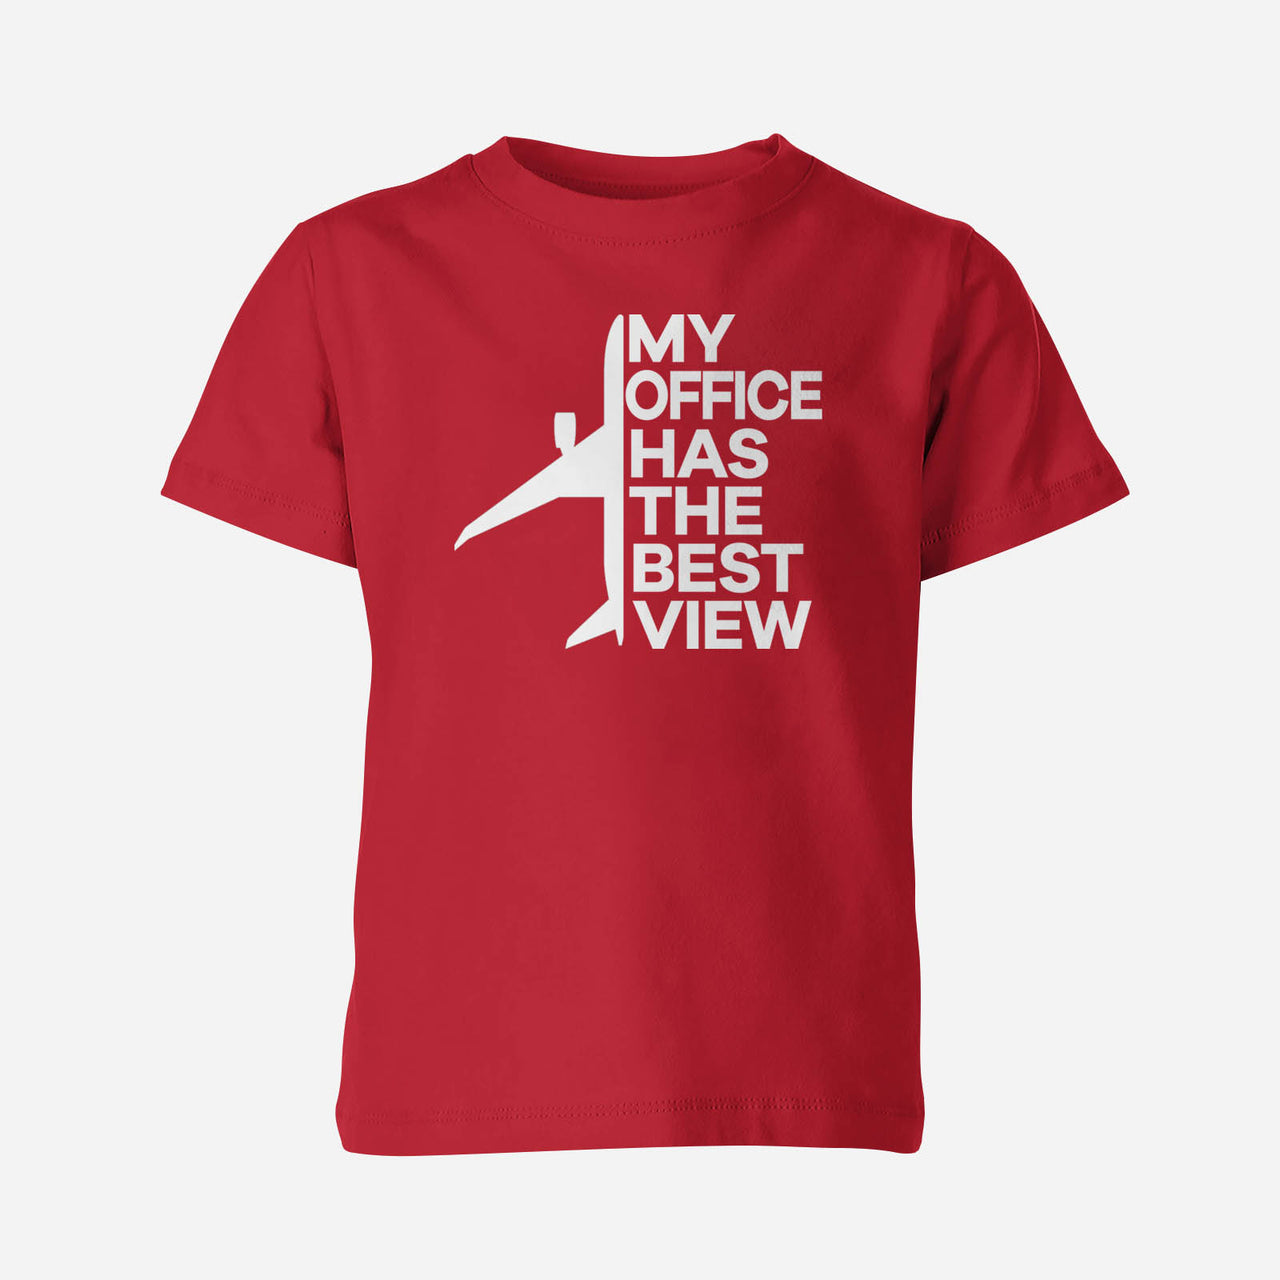 My Office Has The Best View Designed Children T-Shirts